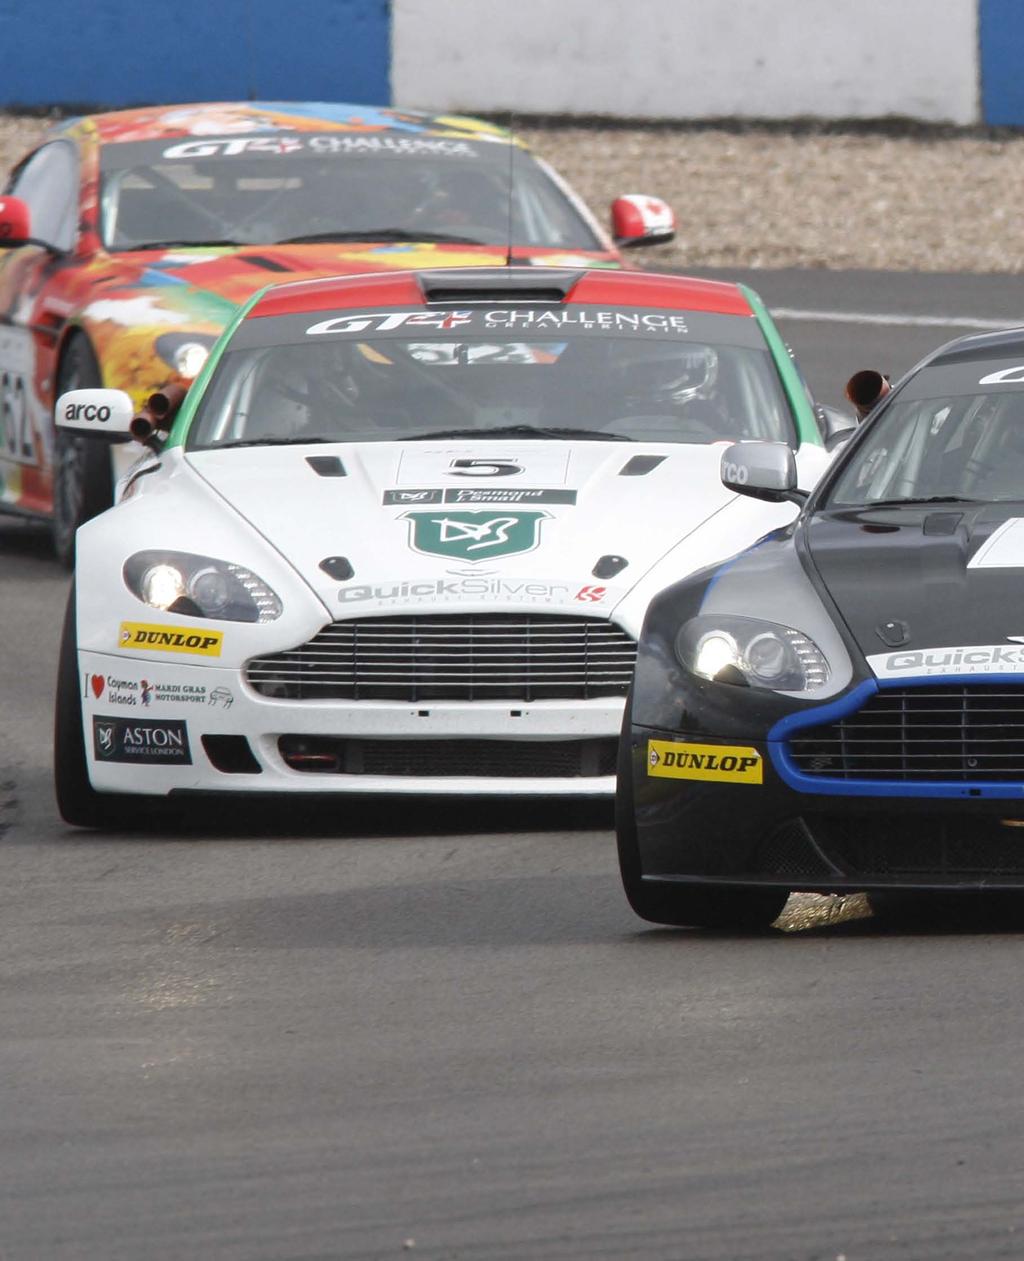 ARRIVE & DRIVE A number of teams in the Aston Martin GT4 Challenge of Great Britain provide an arrive and drive service where you can enter on a race by race basis or sign up for a full season.